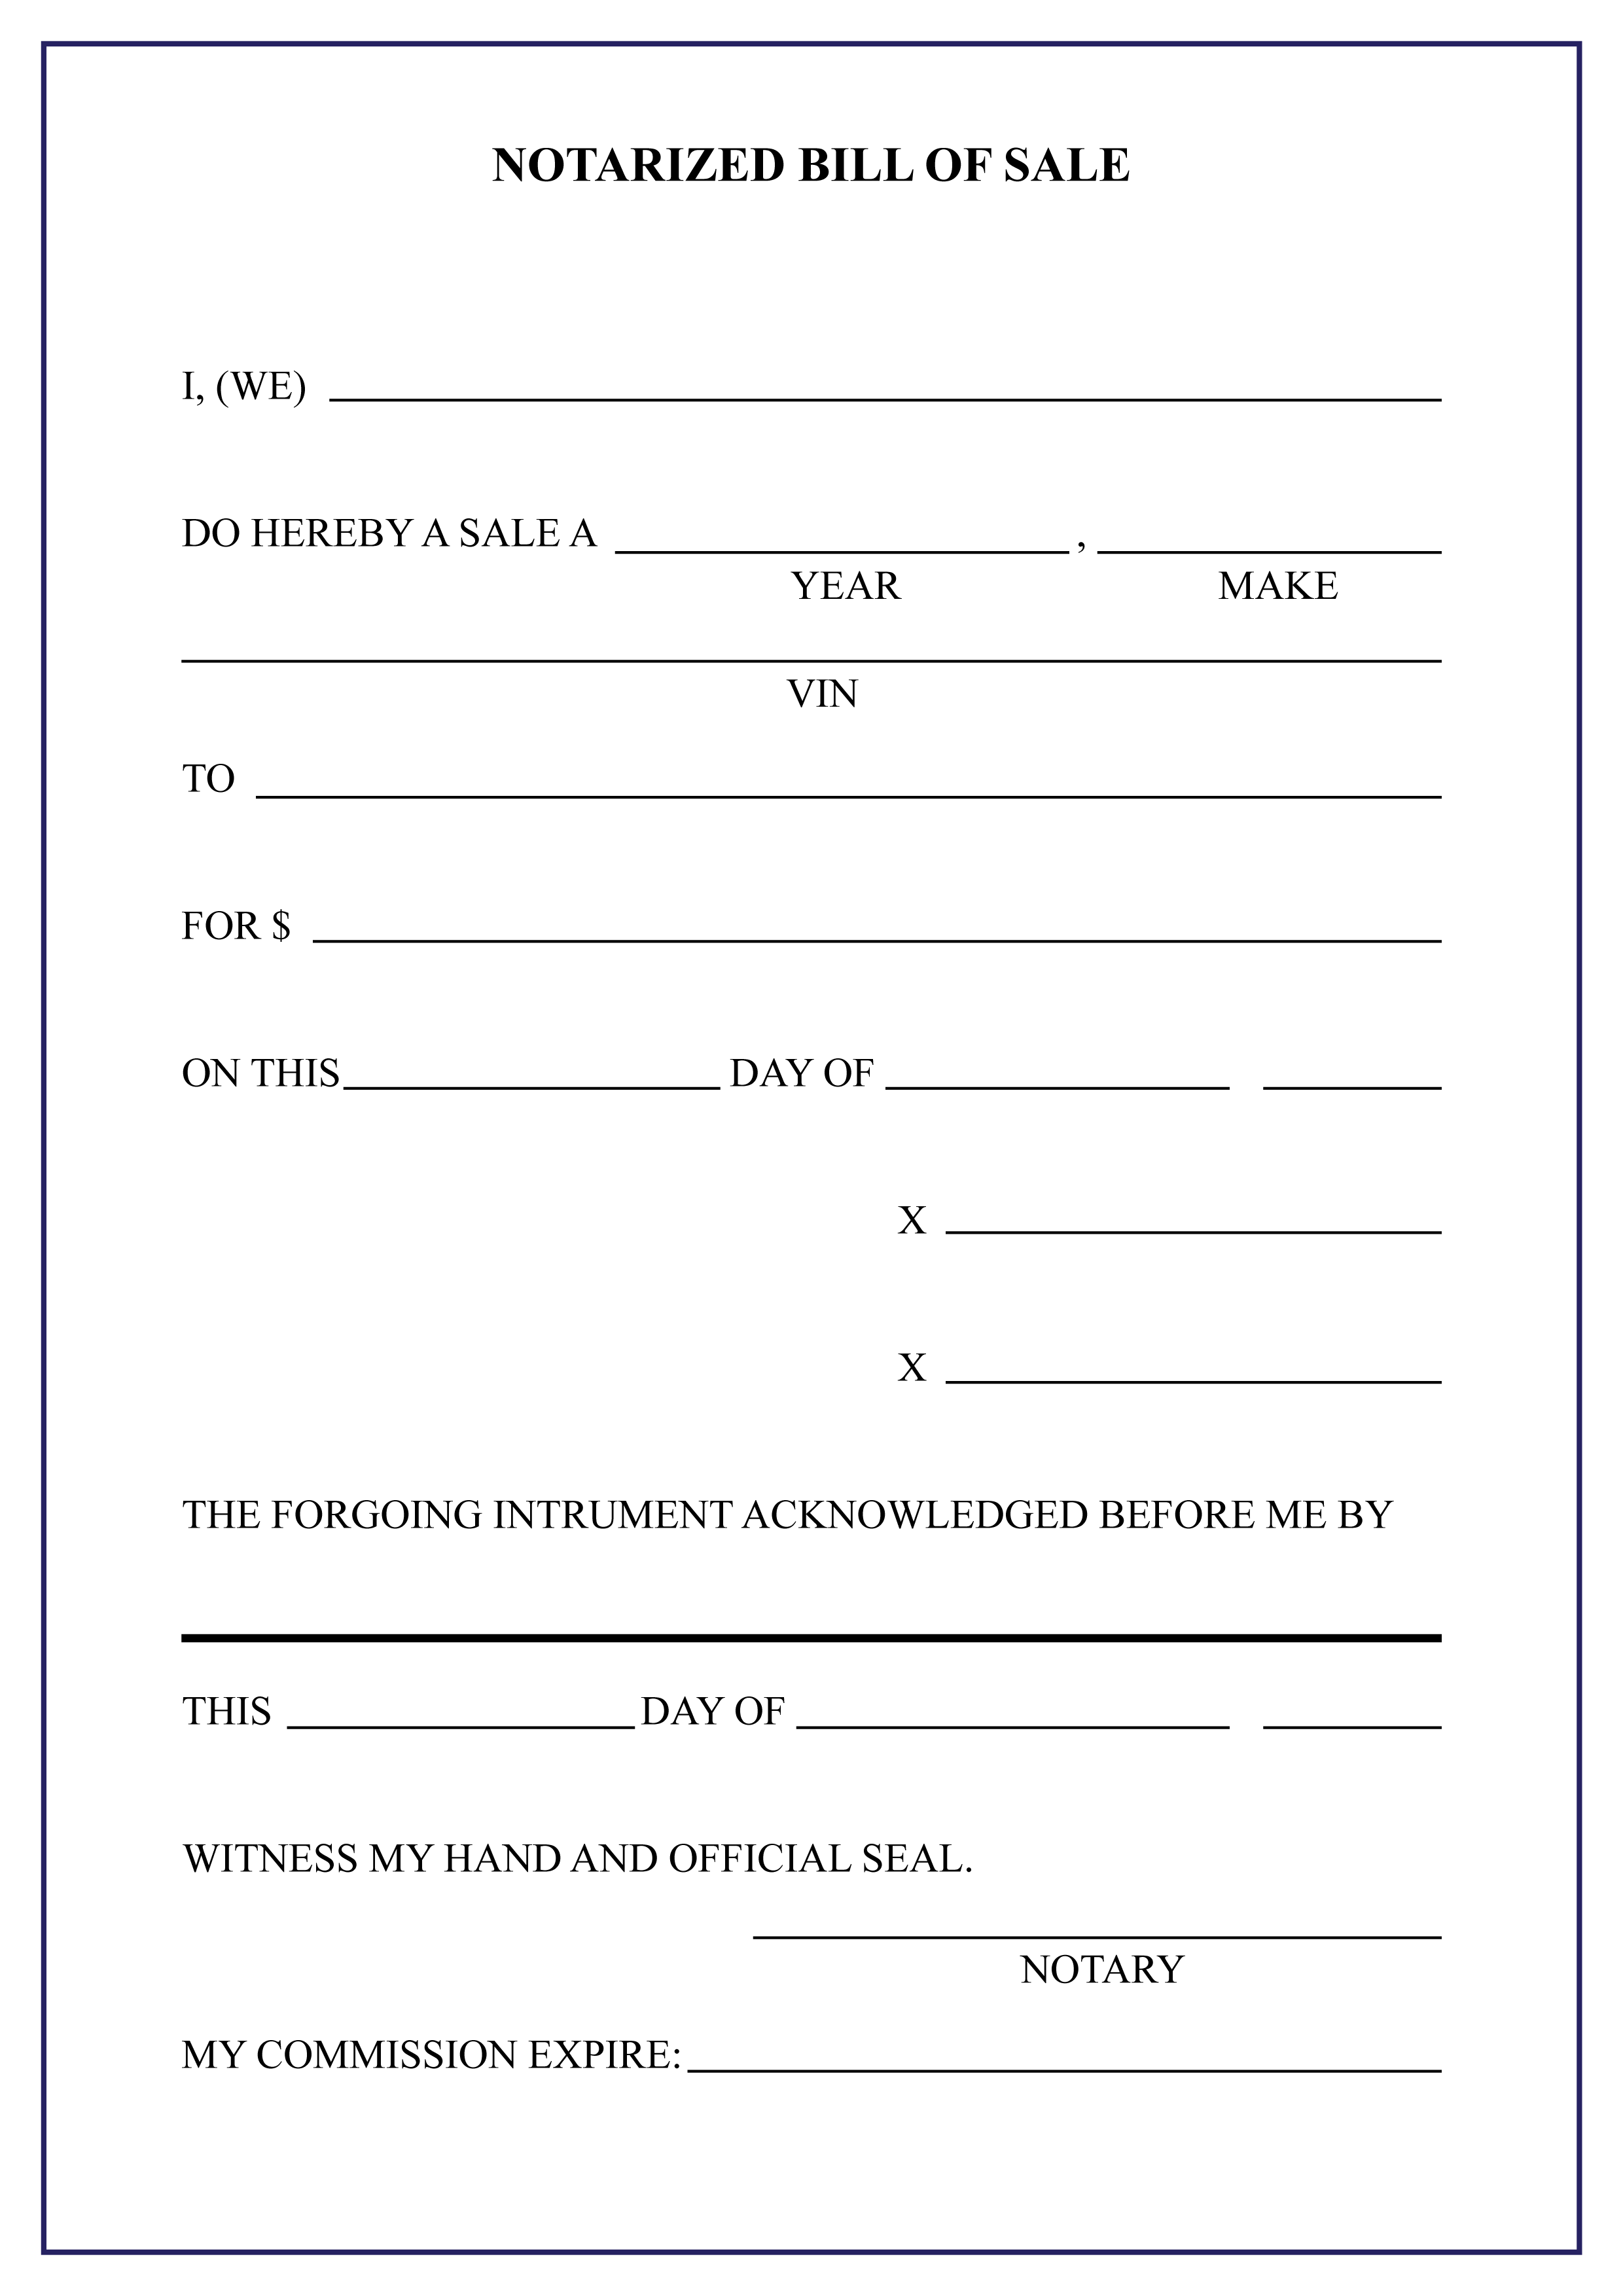 Notarized Bill Of Sale 01 Best Letter Template